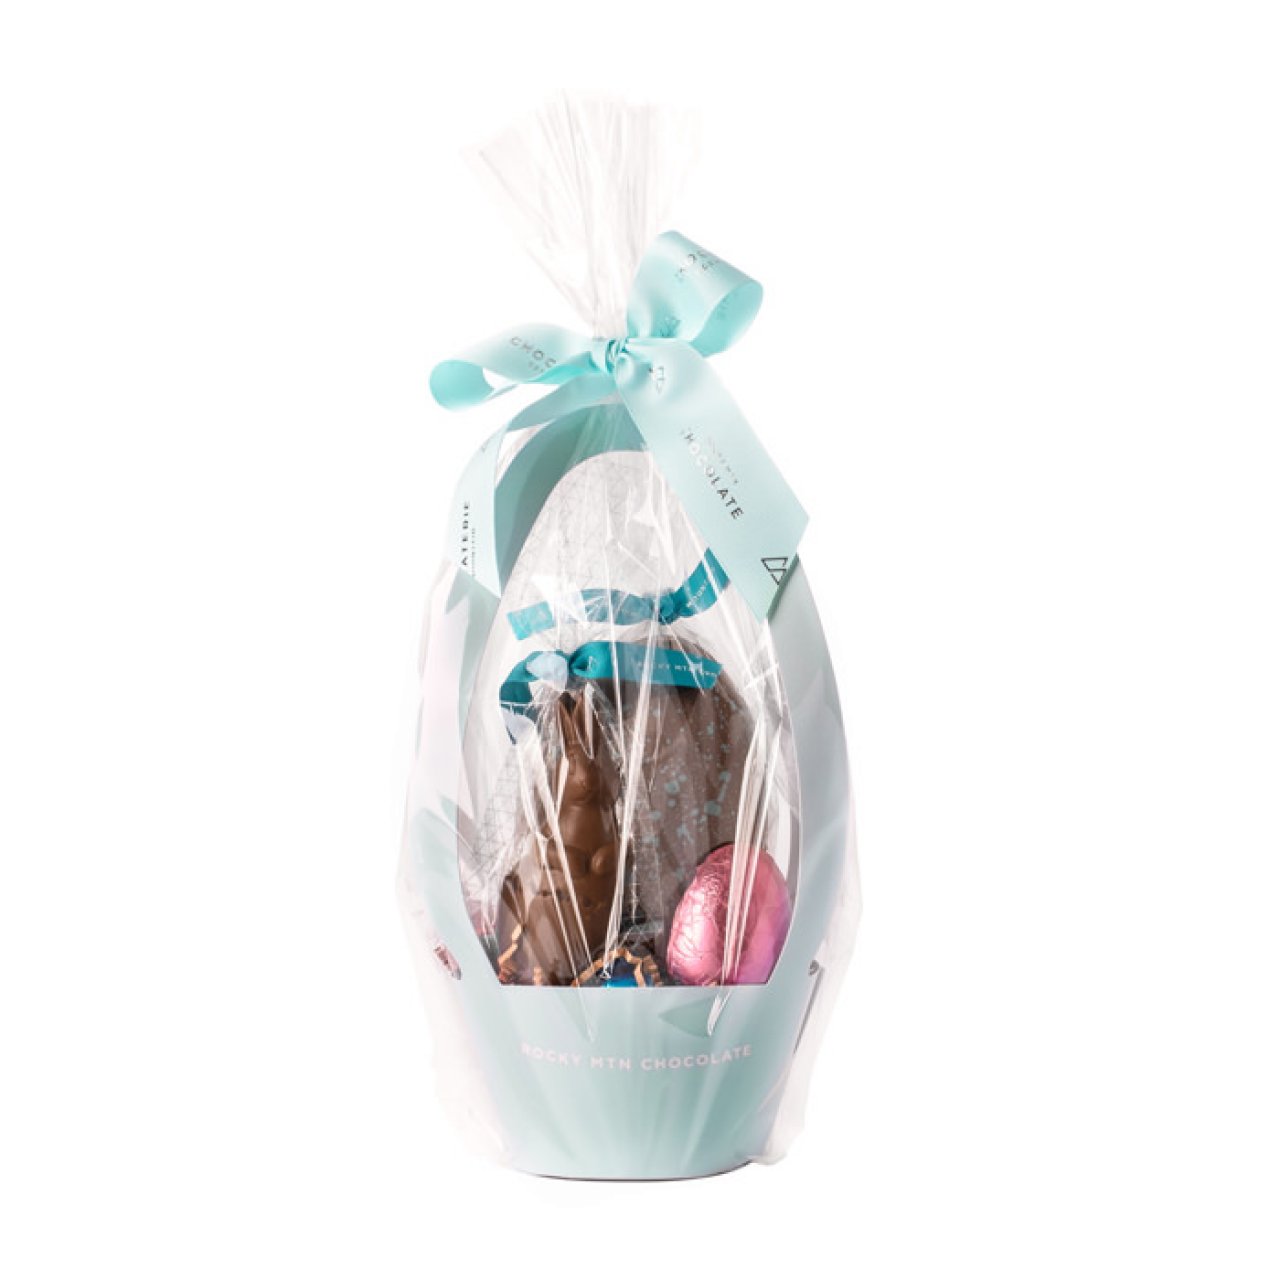 all-your-eggs-in-one-basket-packaged-1.jpg